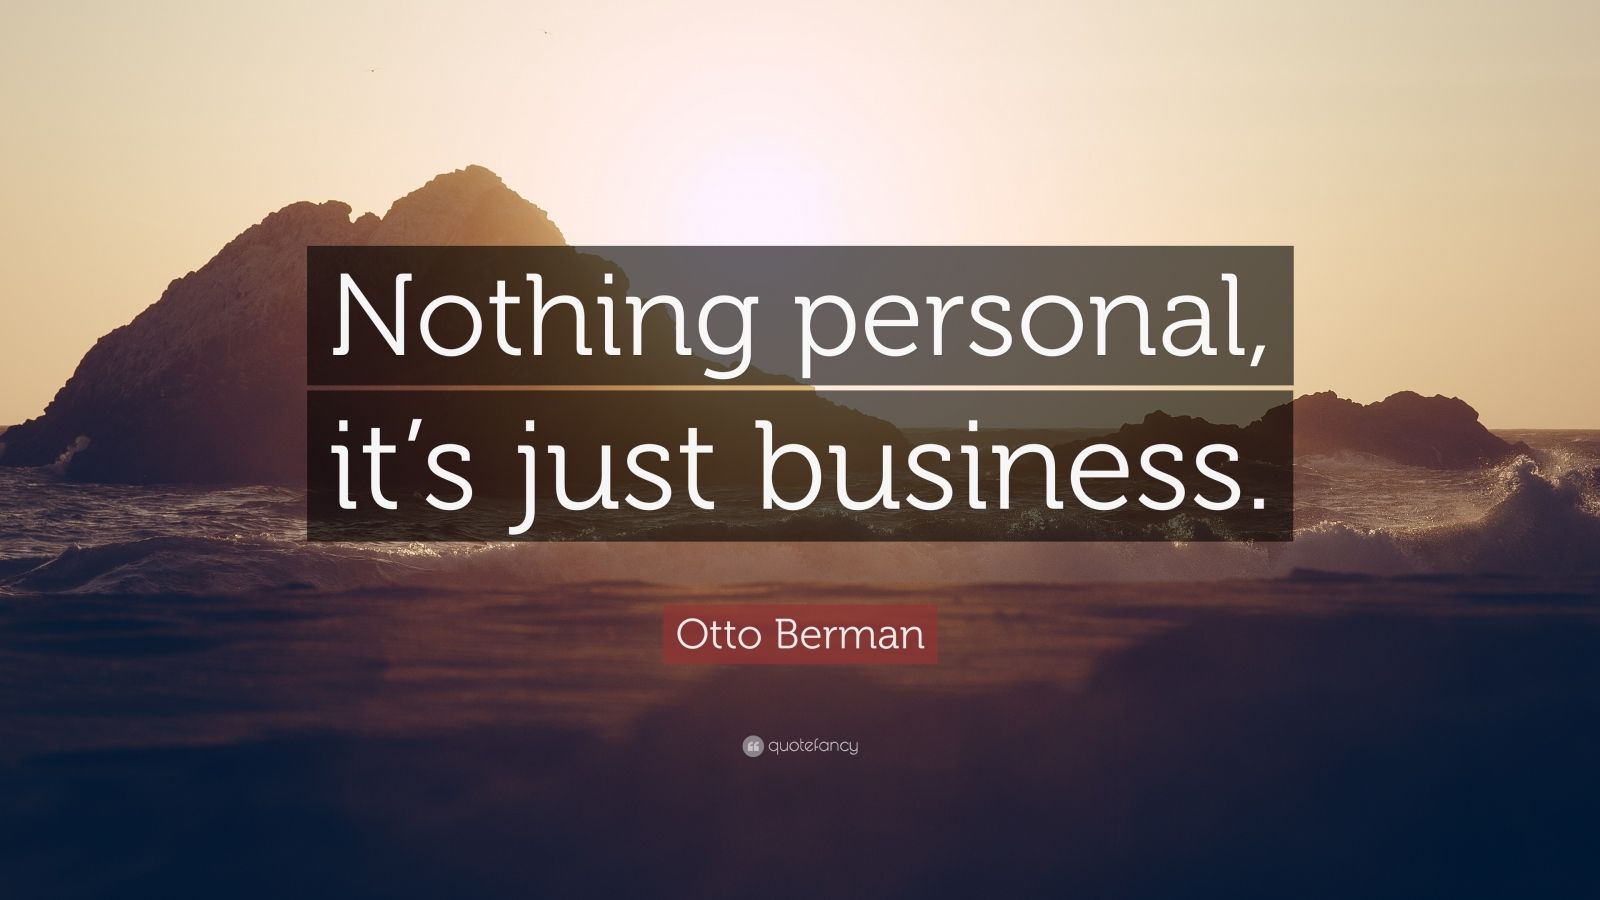 Otto Berman Quote “nothing Personal Its Just Business” 12